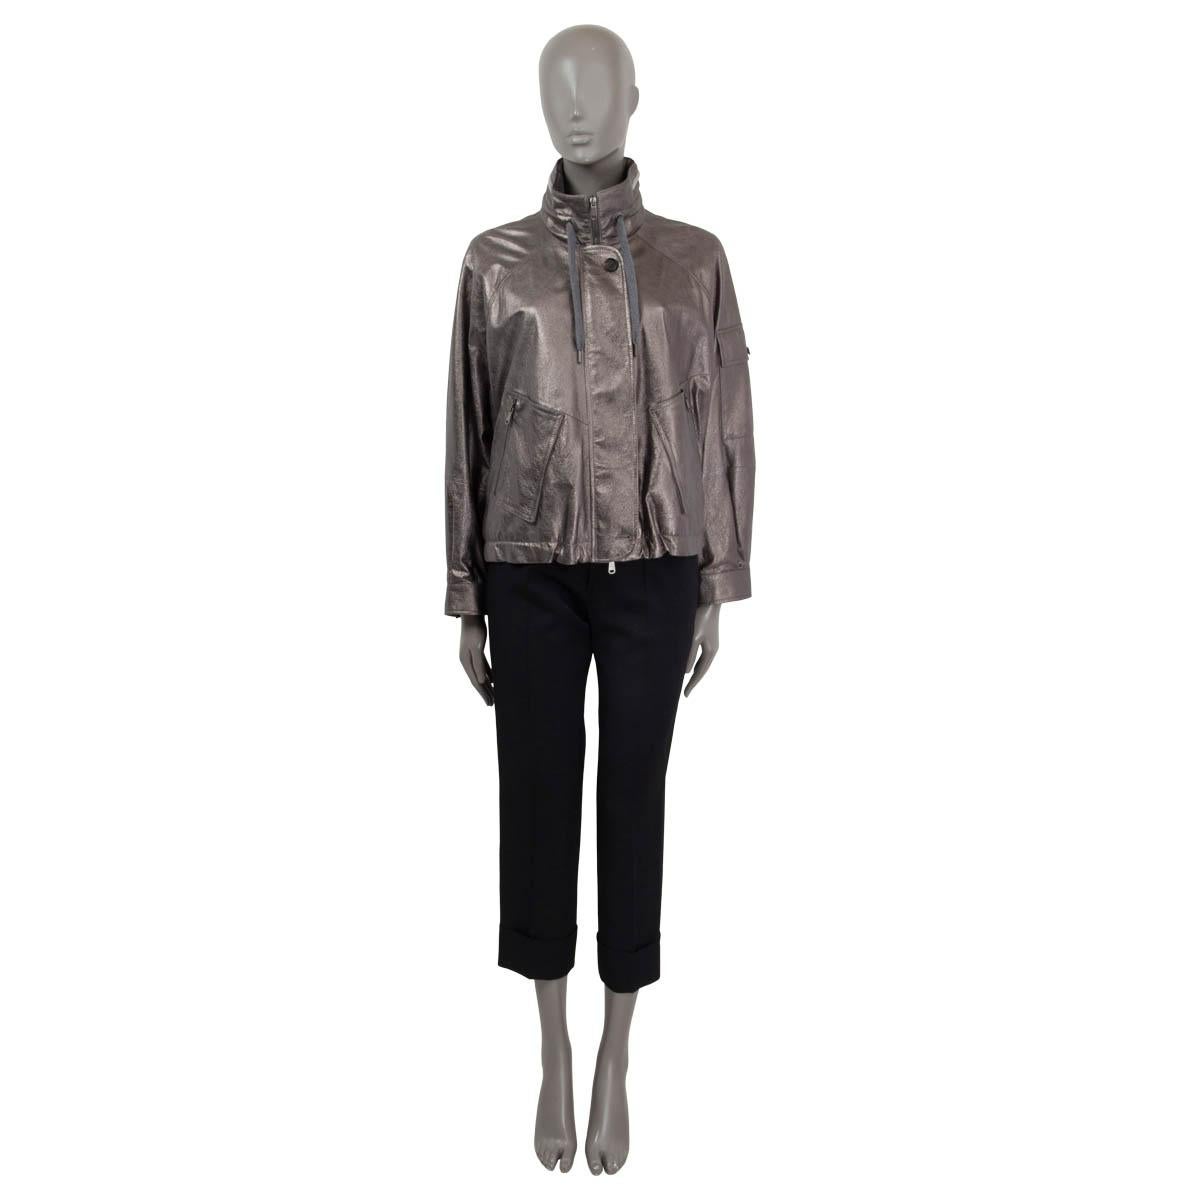 100% authentic Brunello Cucinelli stand collar bomber jacket in metallic silver leather (100%). Features long raglan sleeves (sleeve measurements taken from the neck) and buttoned cuffs. Has a hidden hood and a drawstring closure at the neck and the